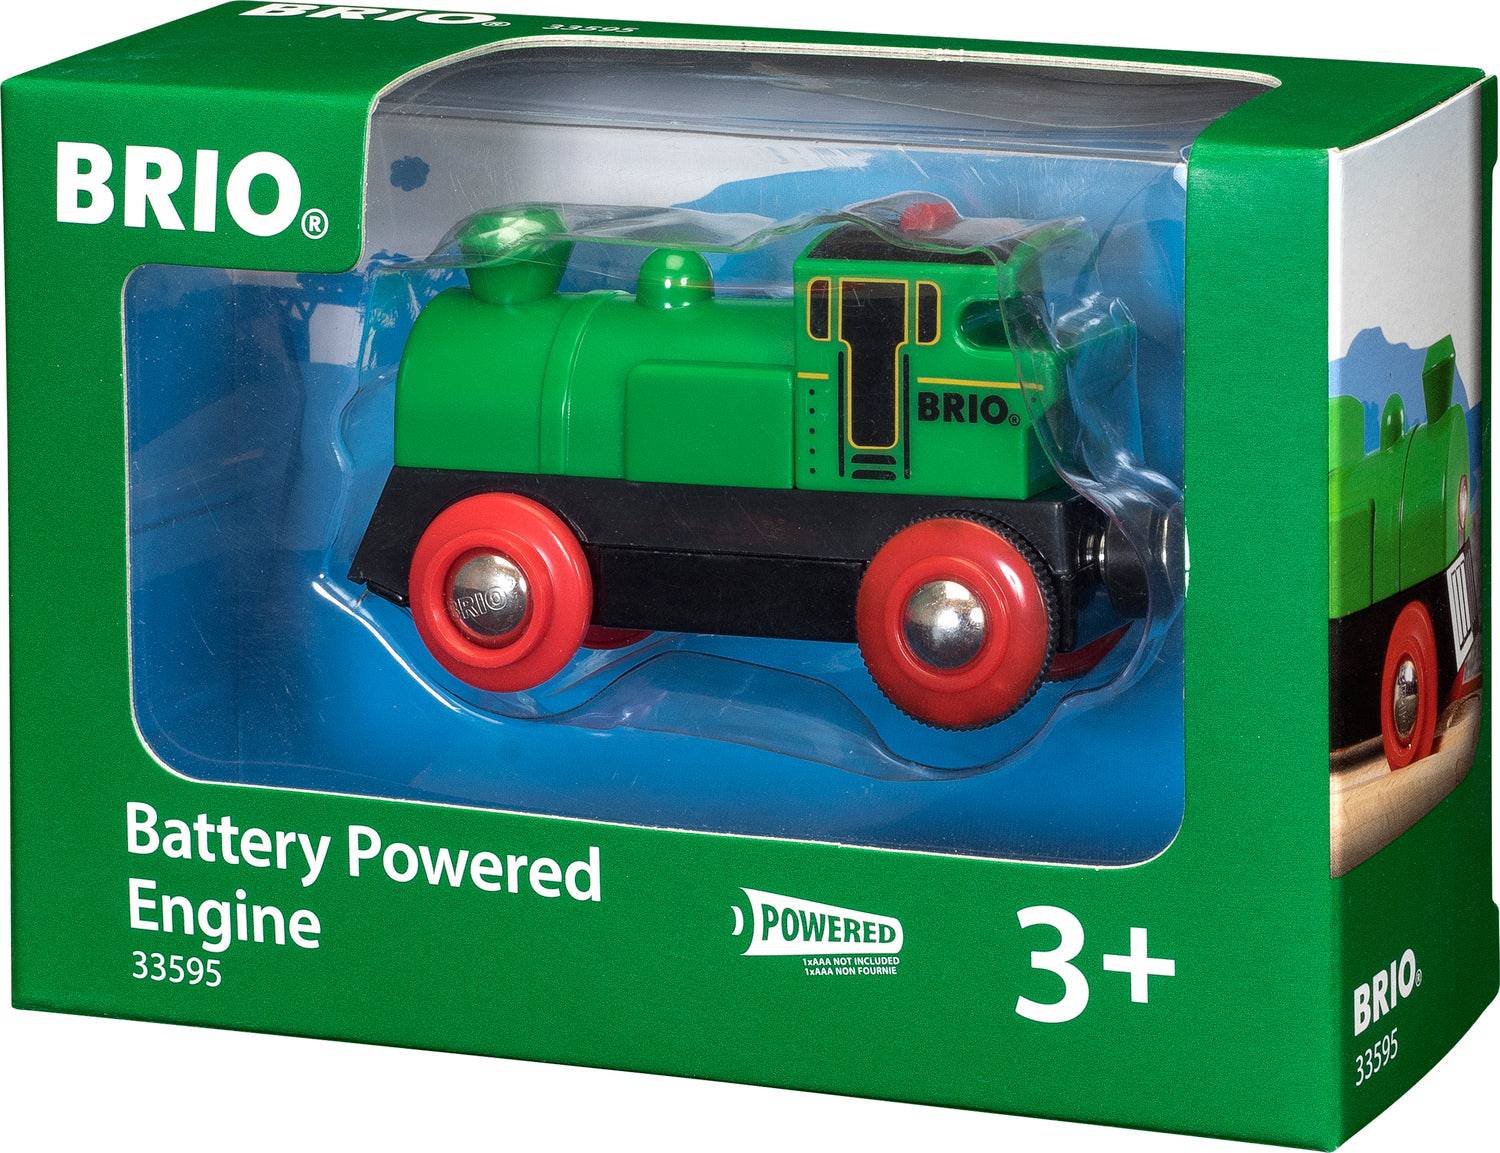 Battery Powered Engine - A Child's Delight